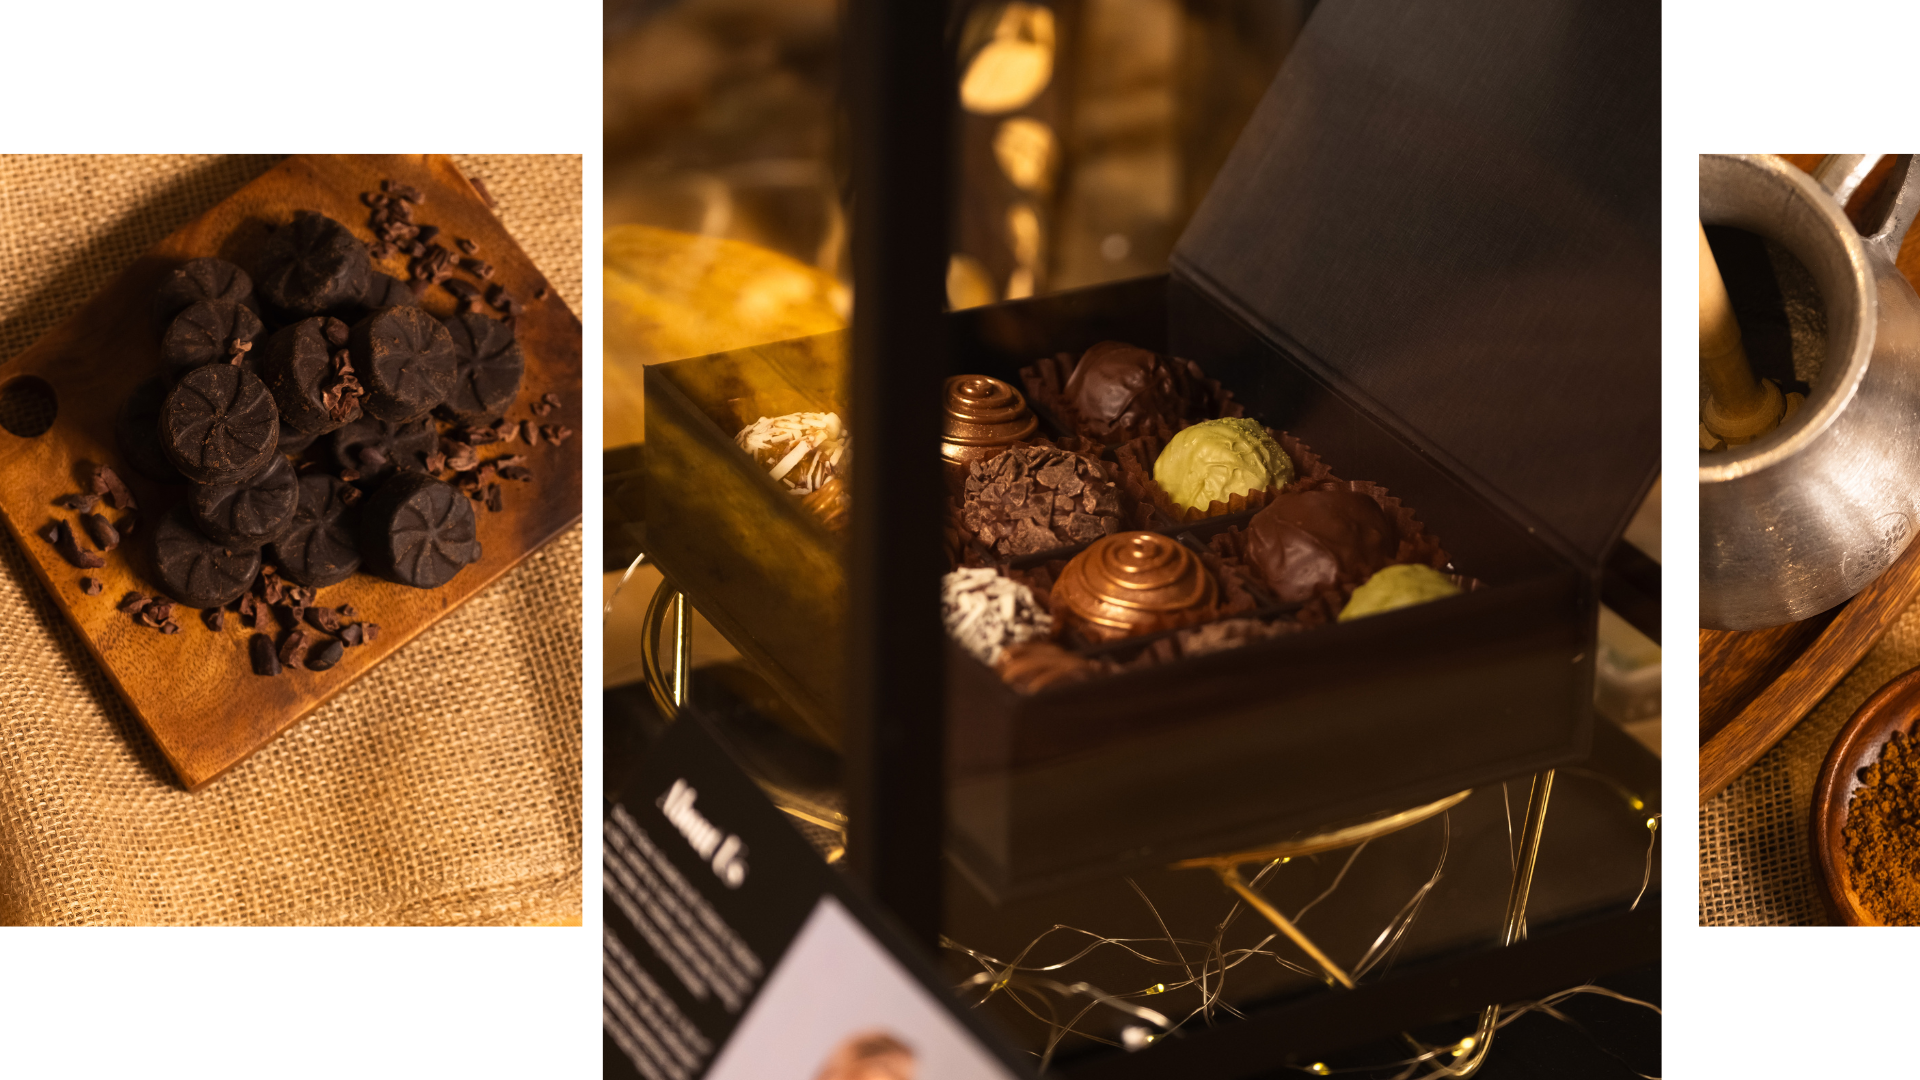 Doncris Cacao Officially Introduces Chocolate Line With Cacao Truffles Collection